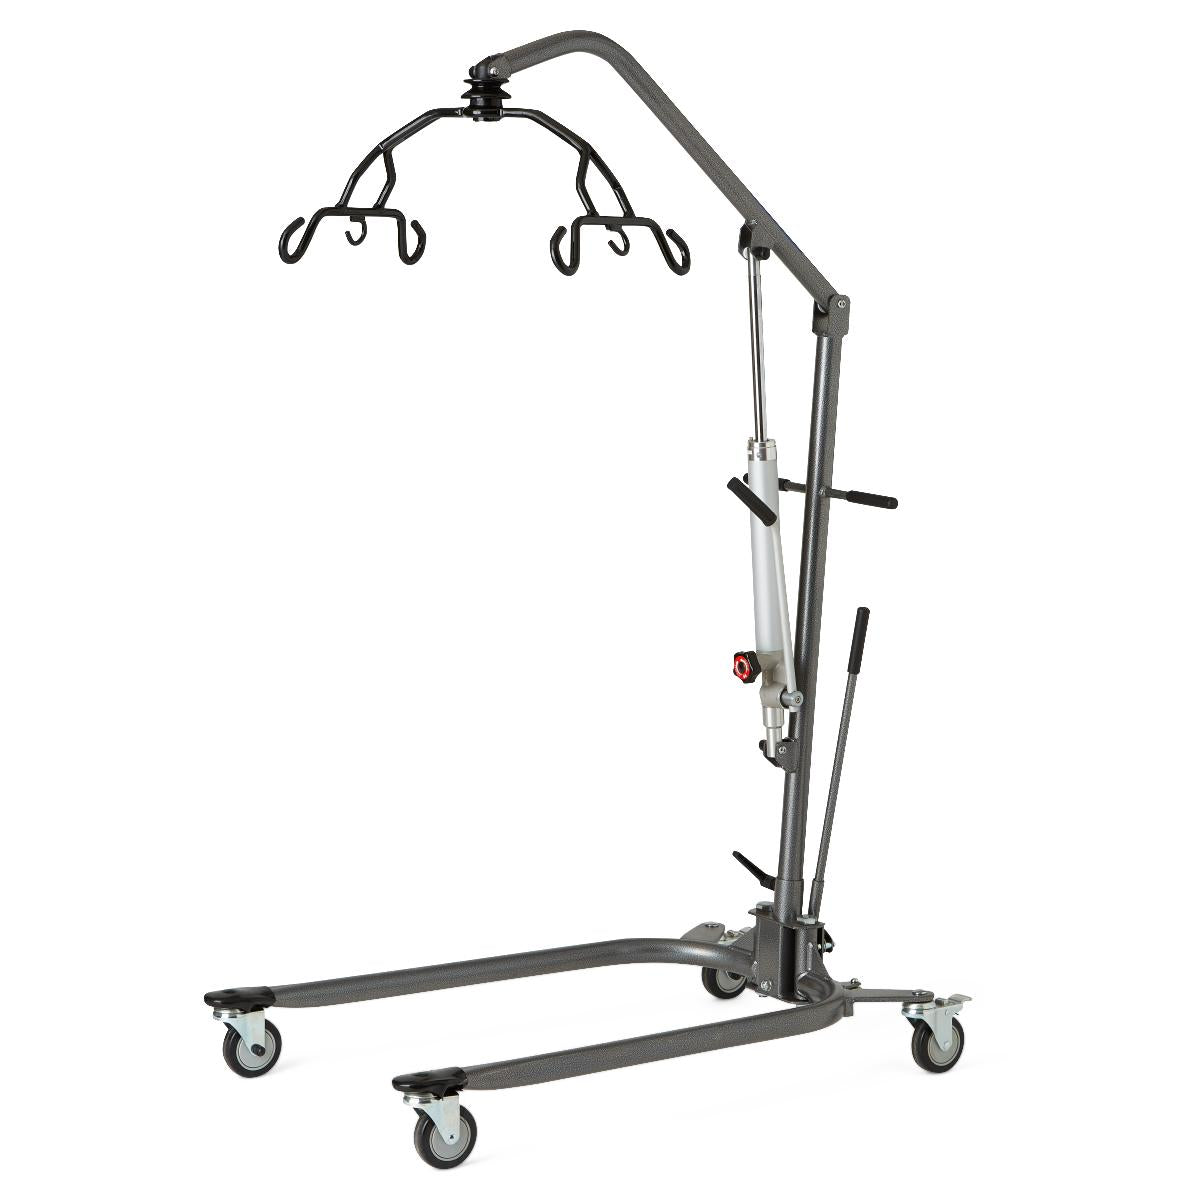 Manual Hydraulic Patient Lift, 6-Point Cradle